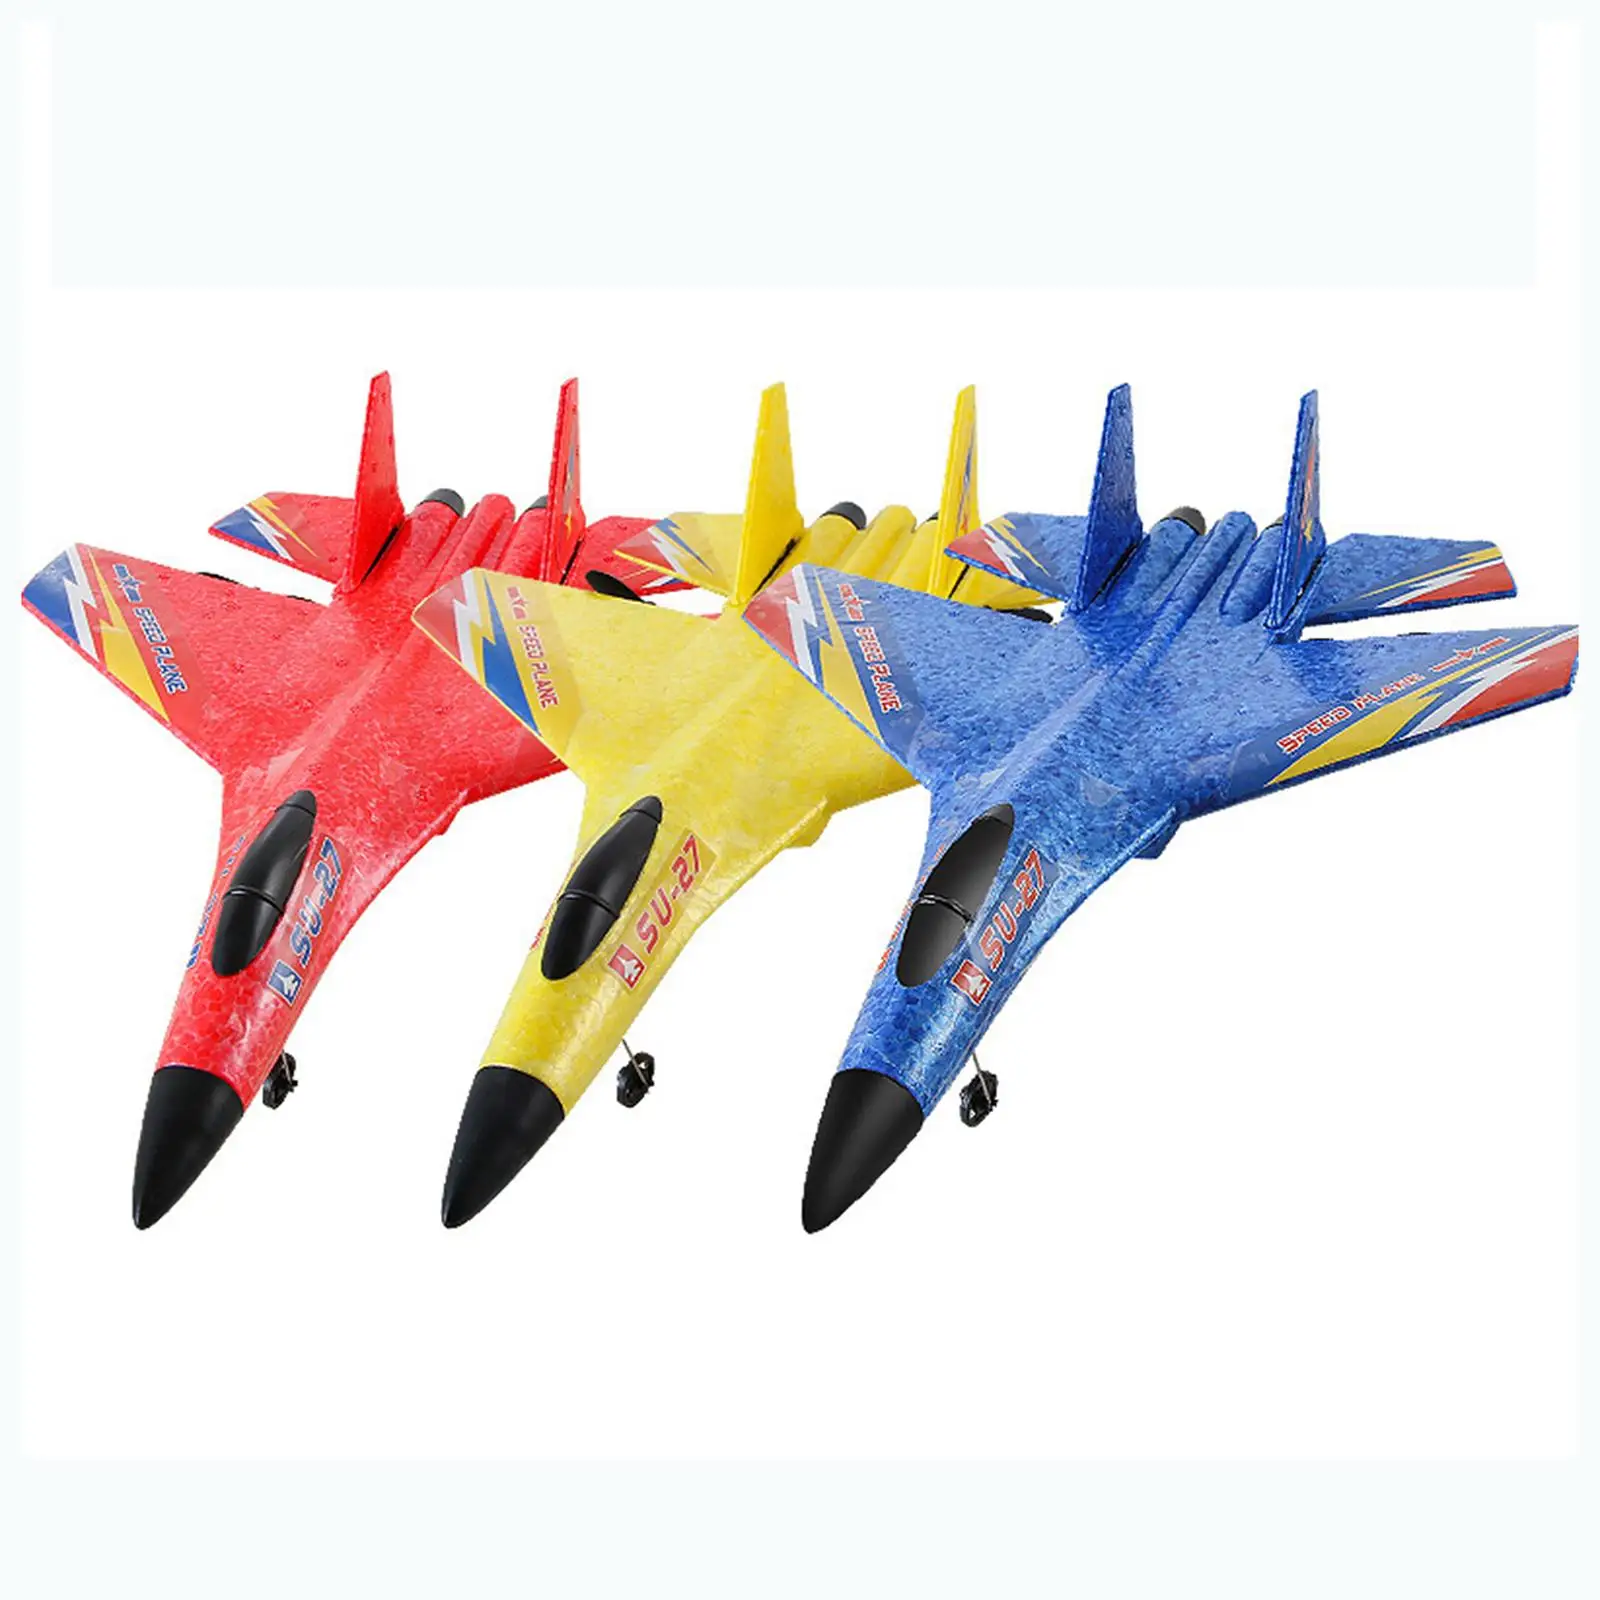 2.4G 2CH RC Fixed Wing Airplane Outdoor Flying Toys Remote Control Plane Aeroplane Aircraft EPP RC Airplane